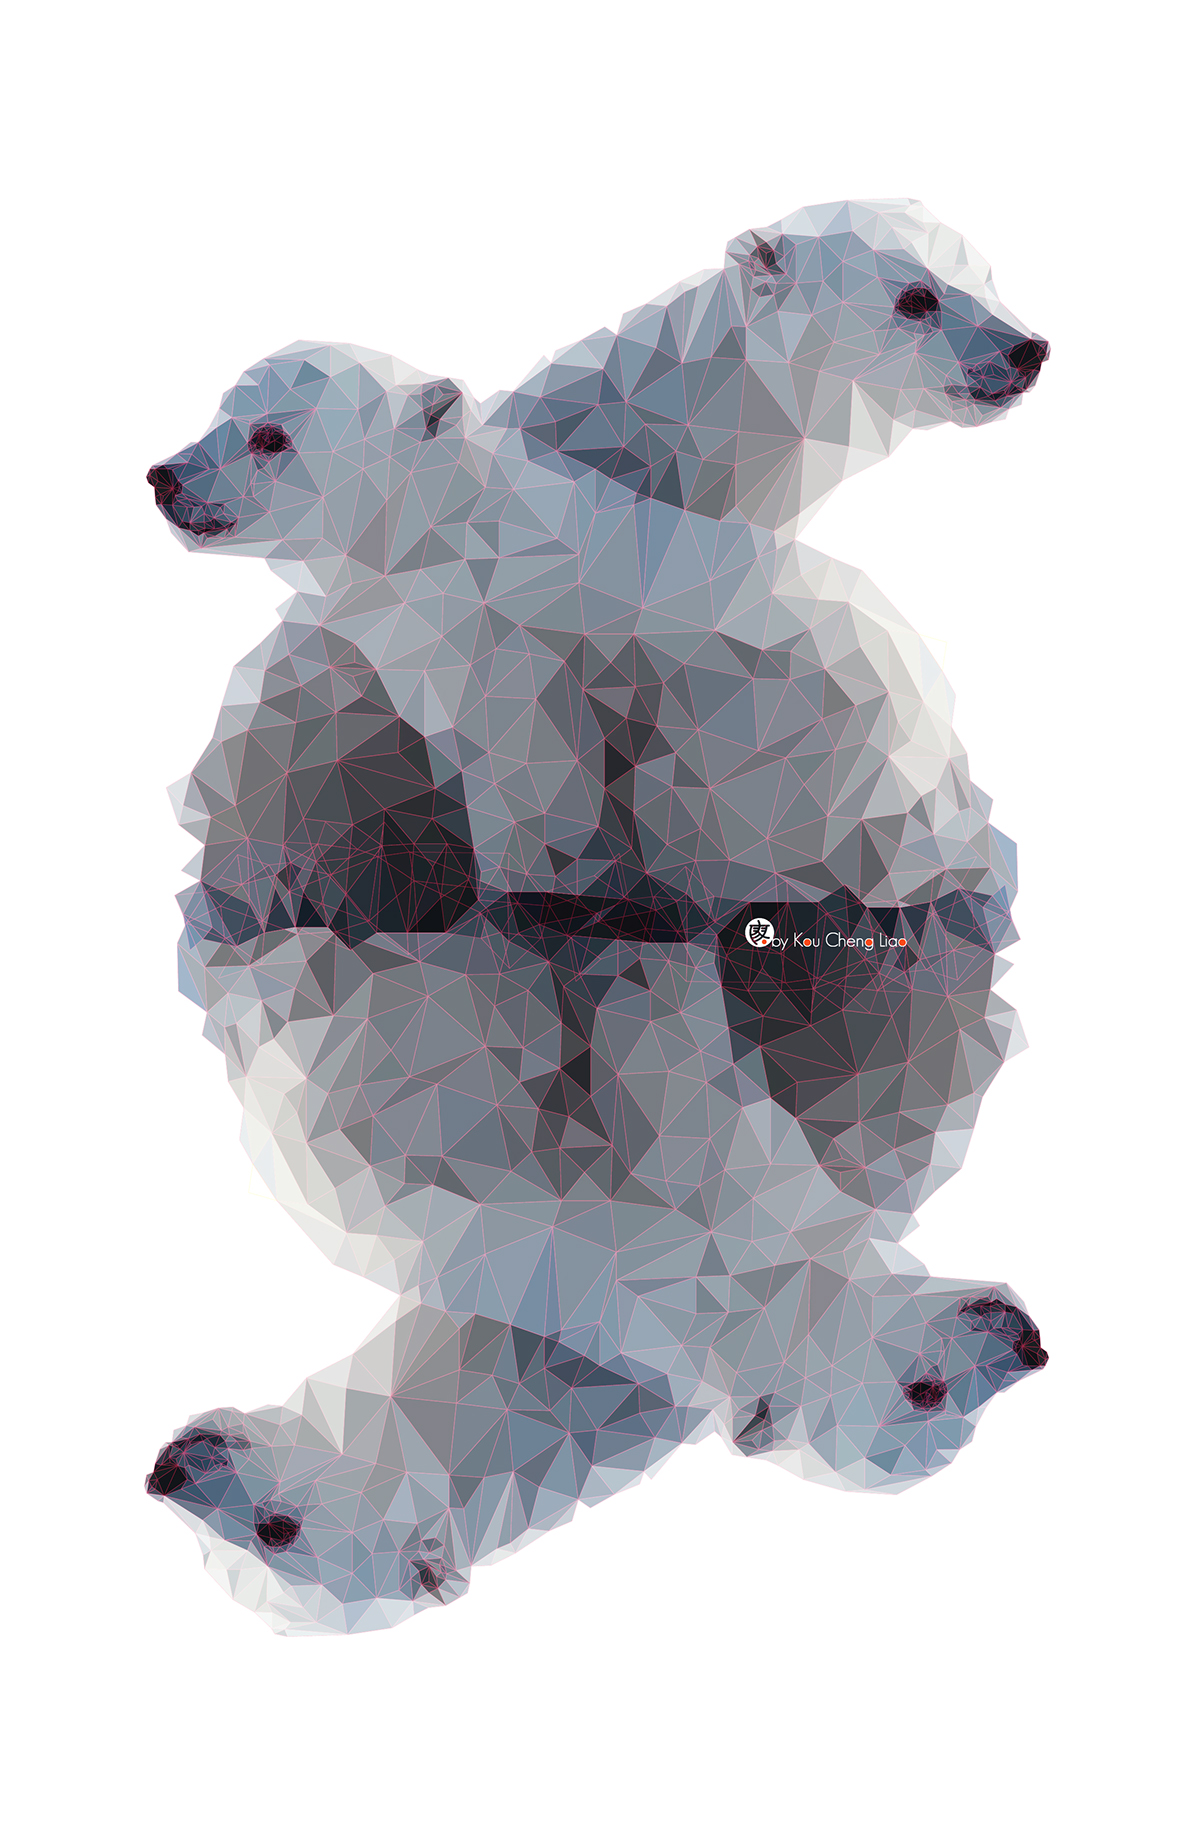 Polar Bear north Pole ice vector cold blue White geometry c4d inspire Low Poly